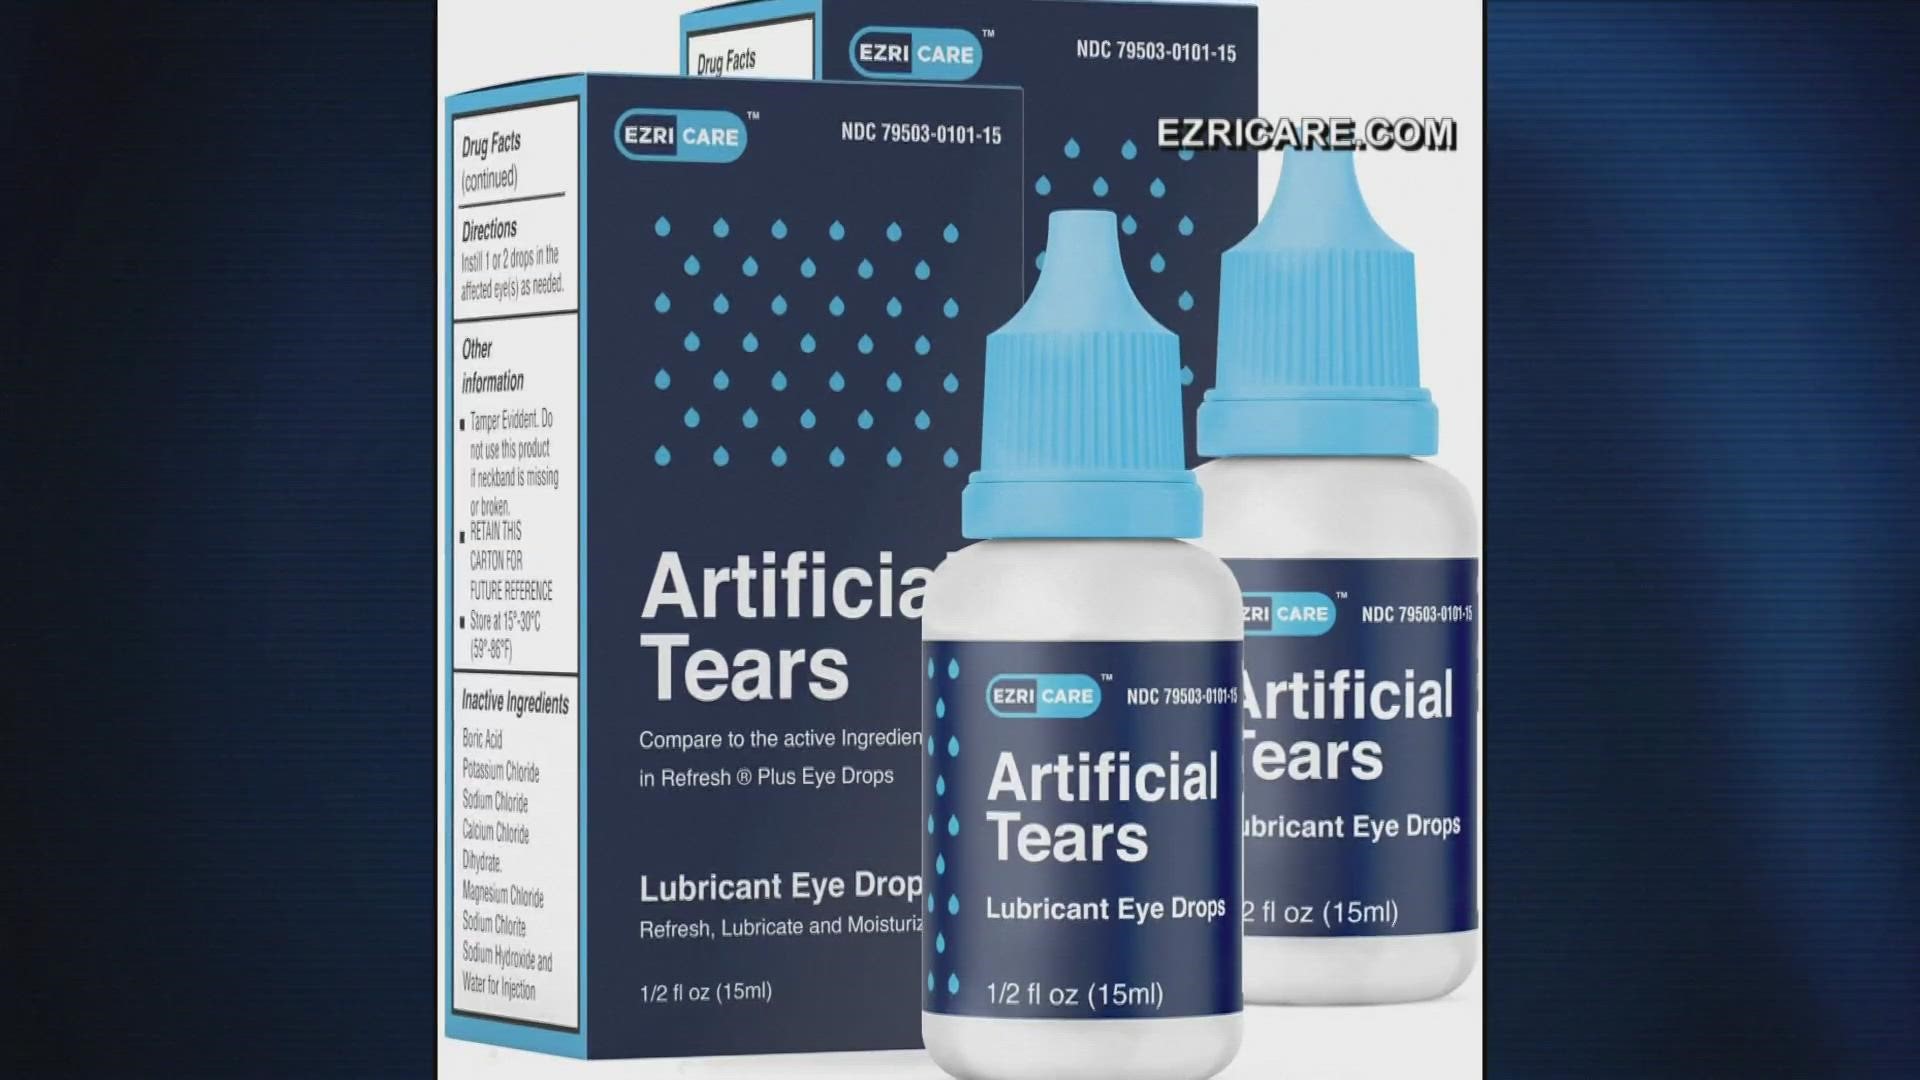 There is no definitive link to the specific brand of eye drops, but the U.S. CDC and manufacturer both say to discontinue use during this time.